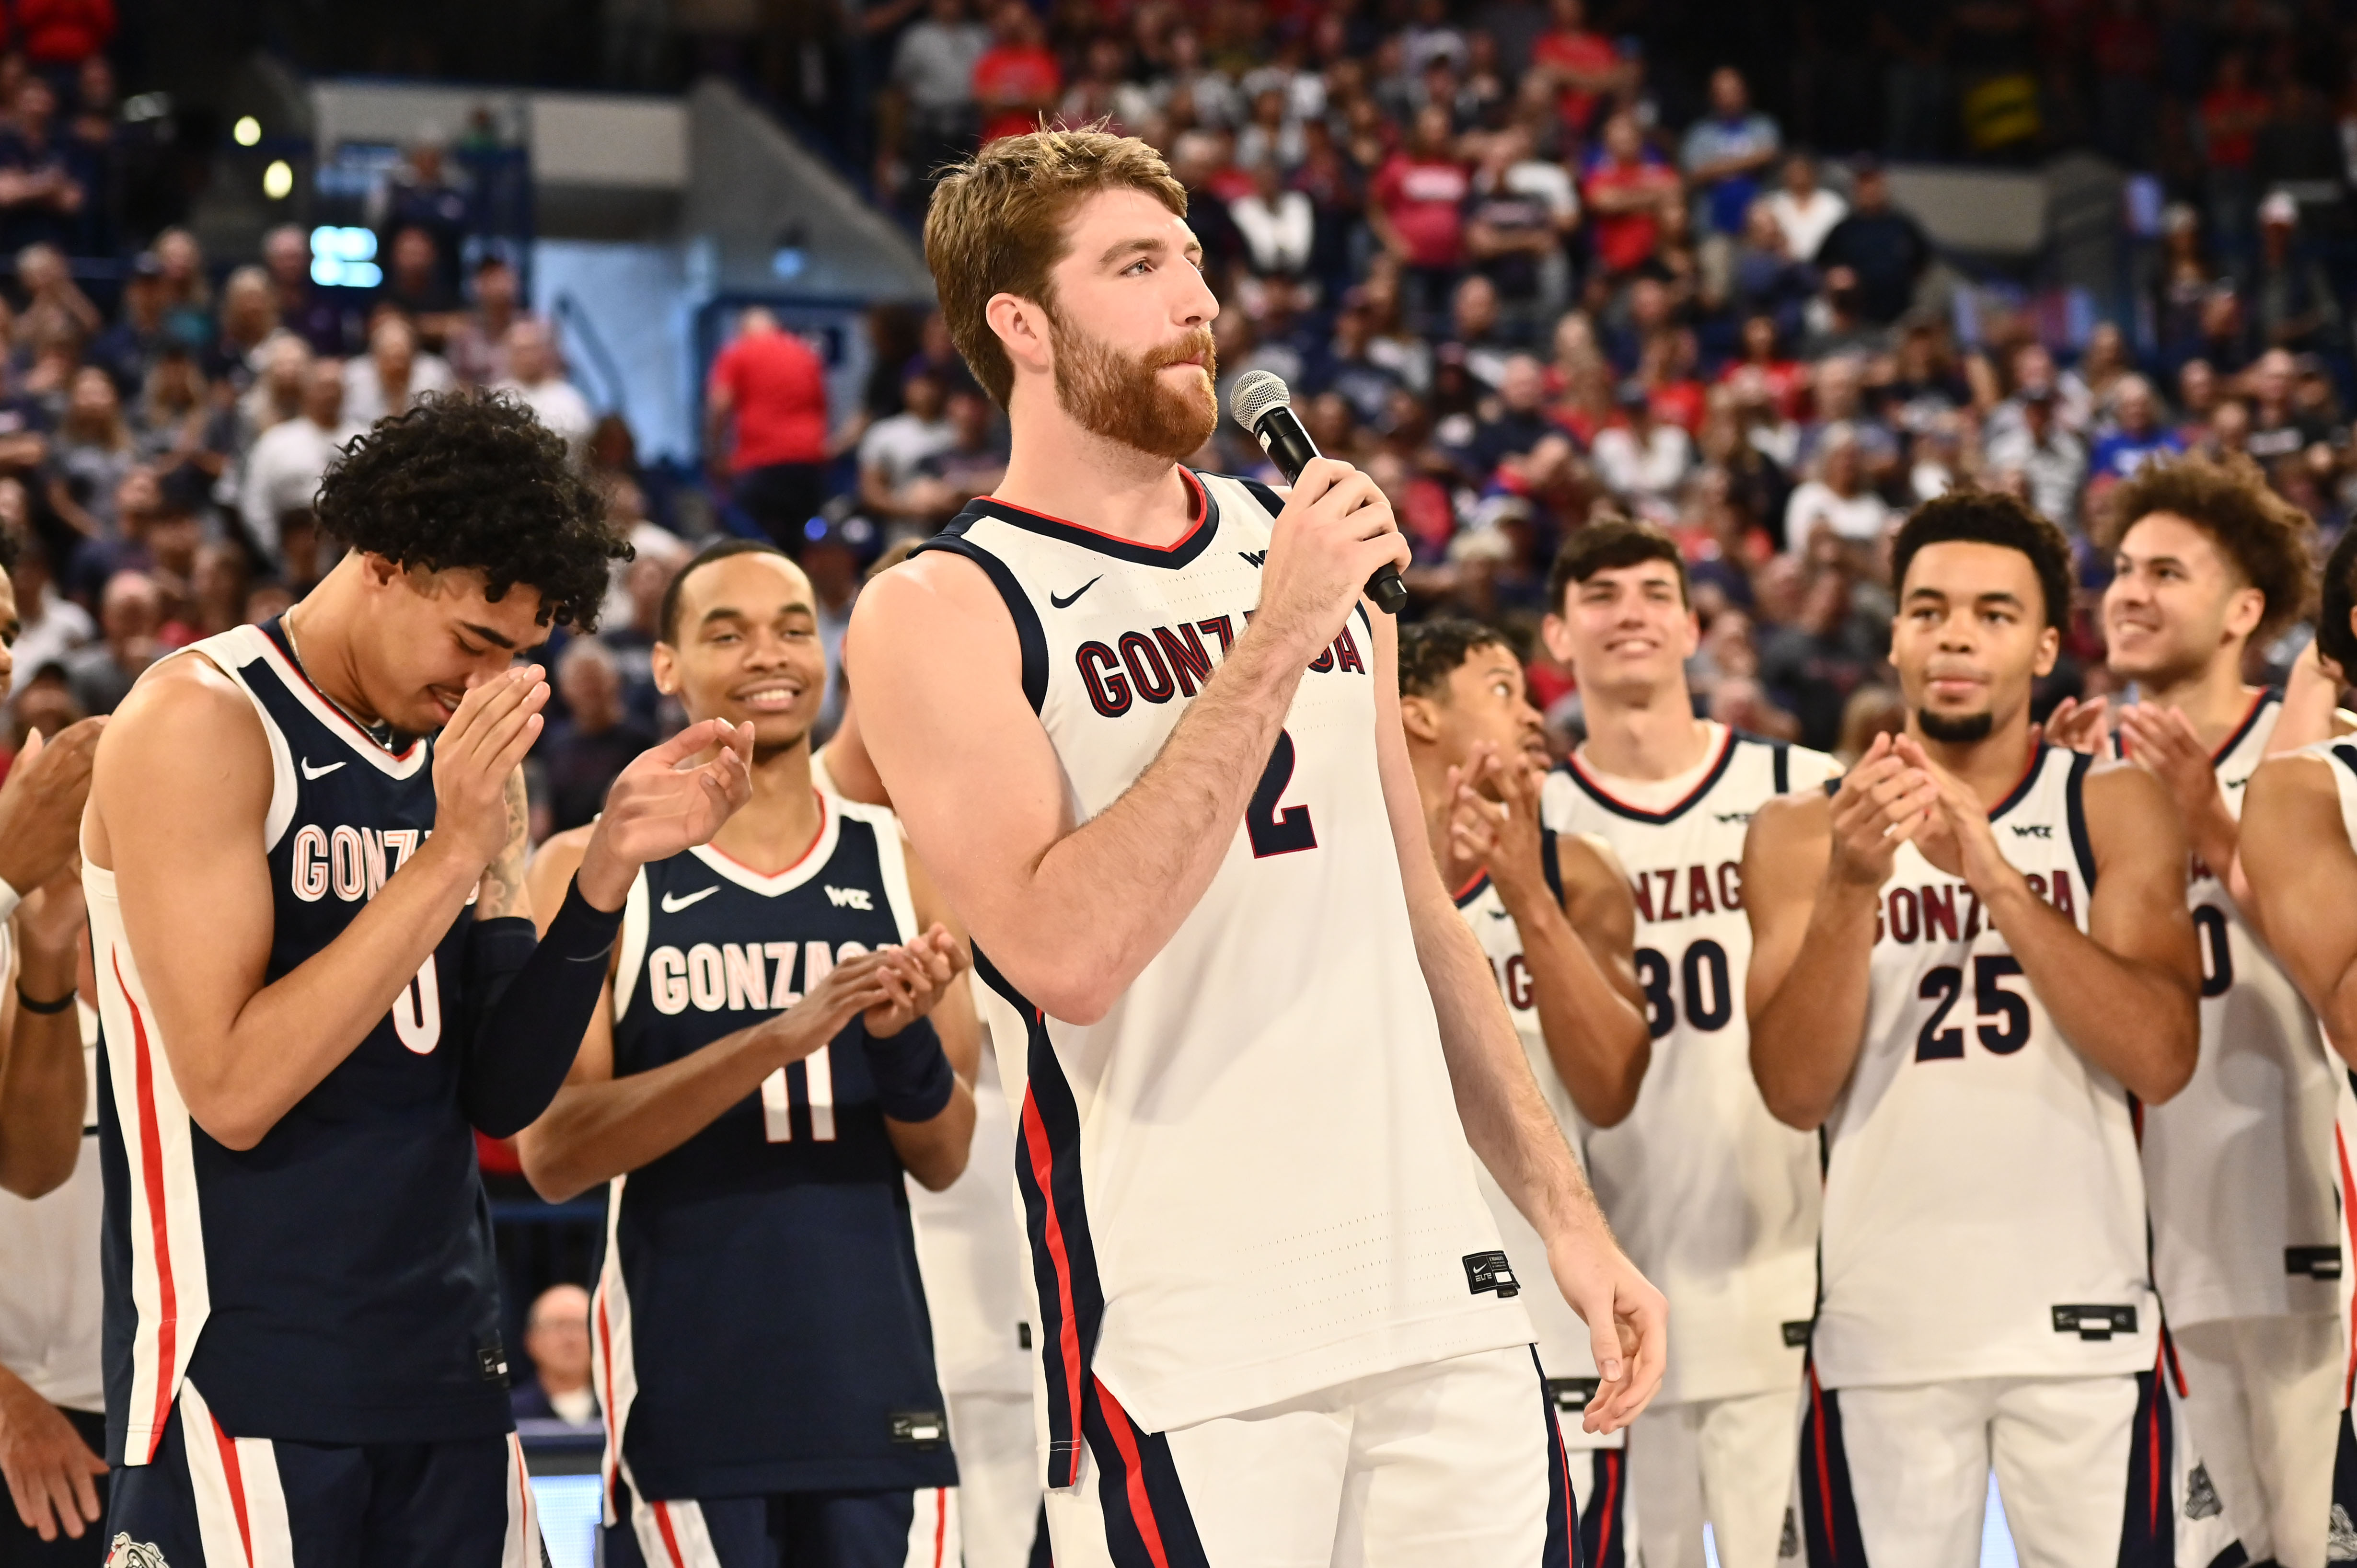 NCAA Basketball: Kraziness in the Kennel